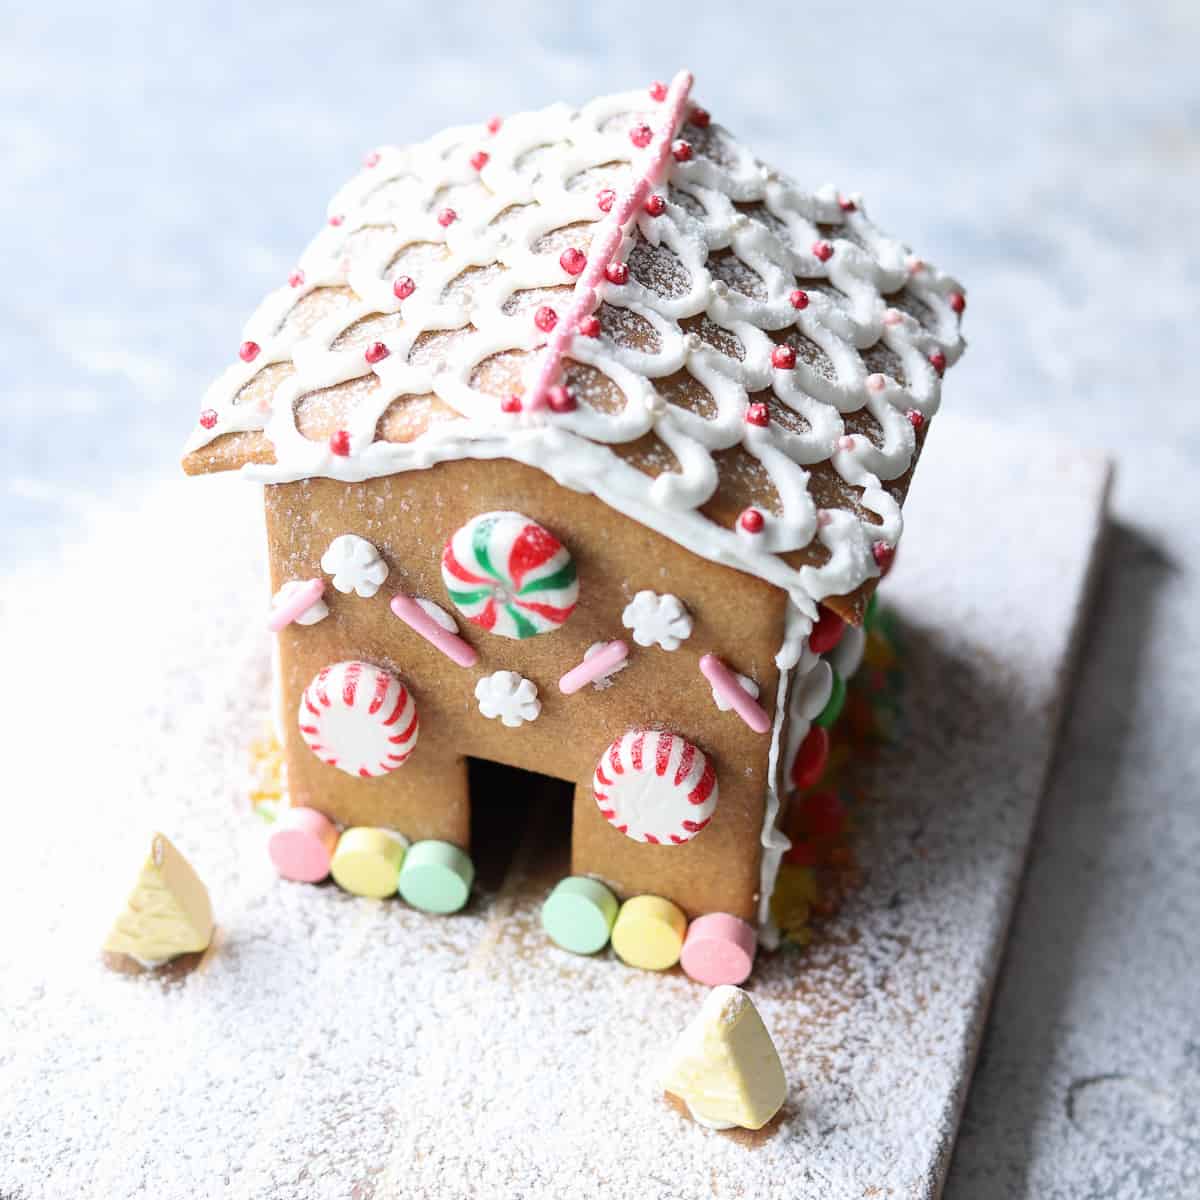 Decorated gingerbread house on board